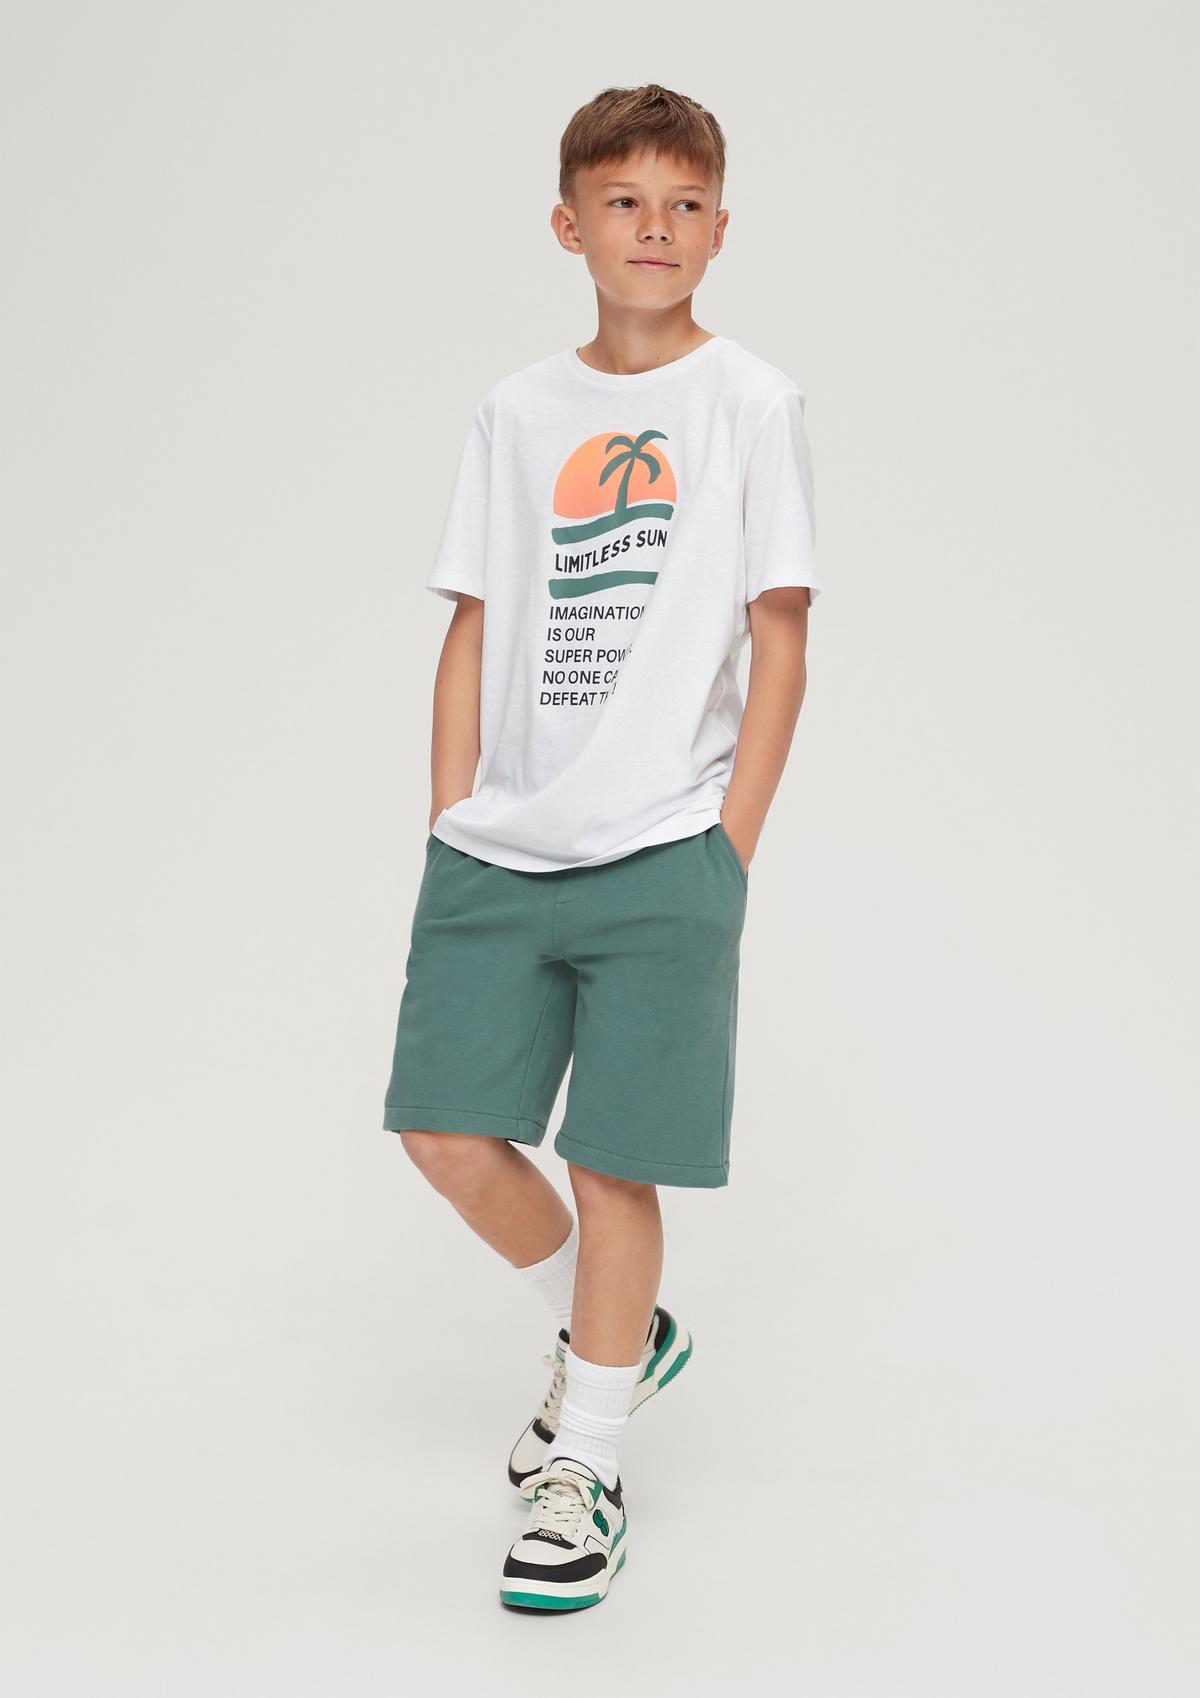 Bermuda boys shorts Find teens for online and